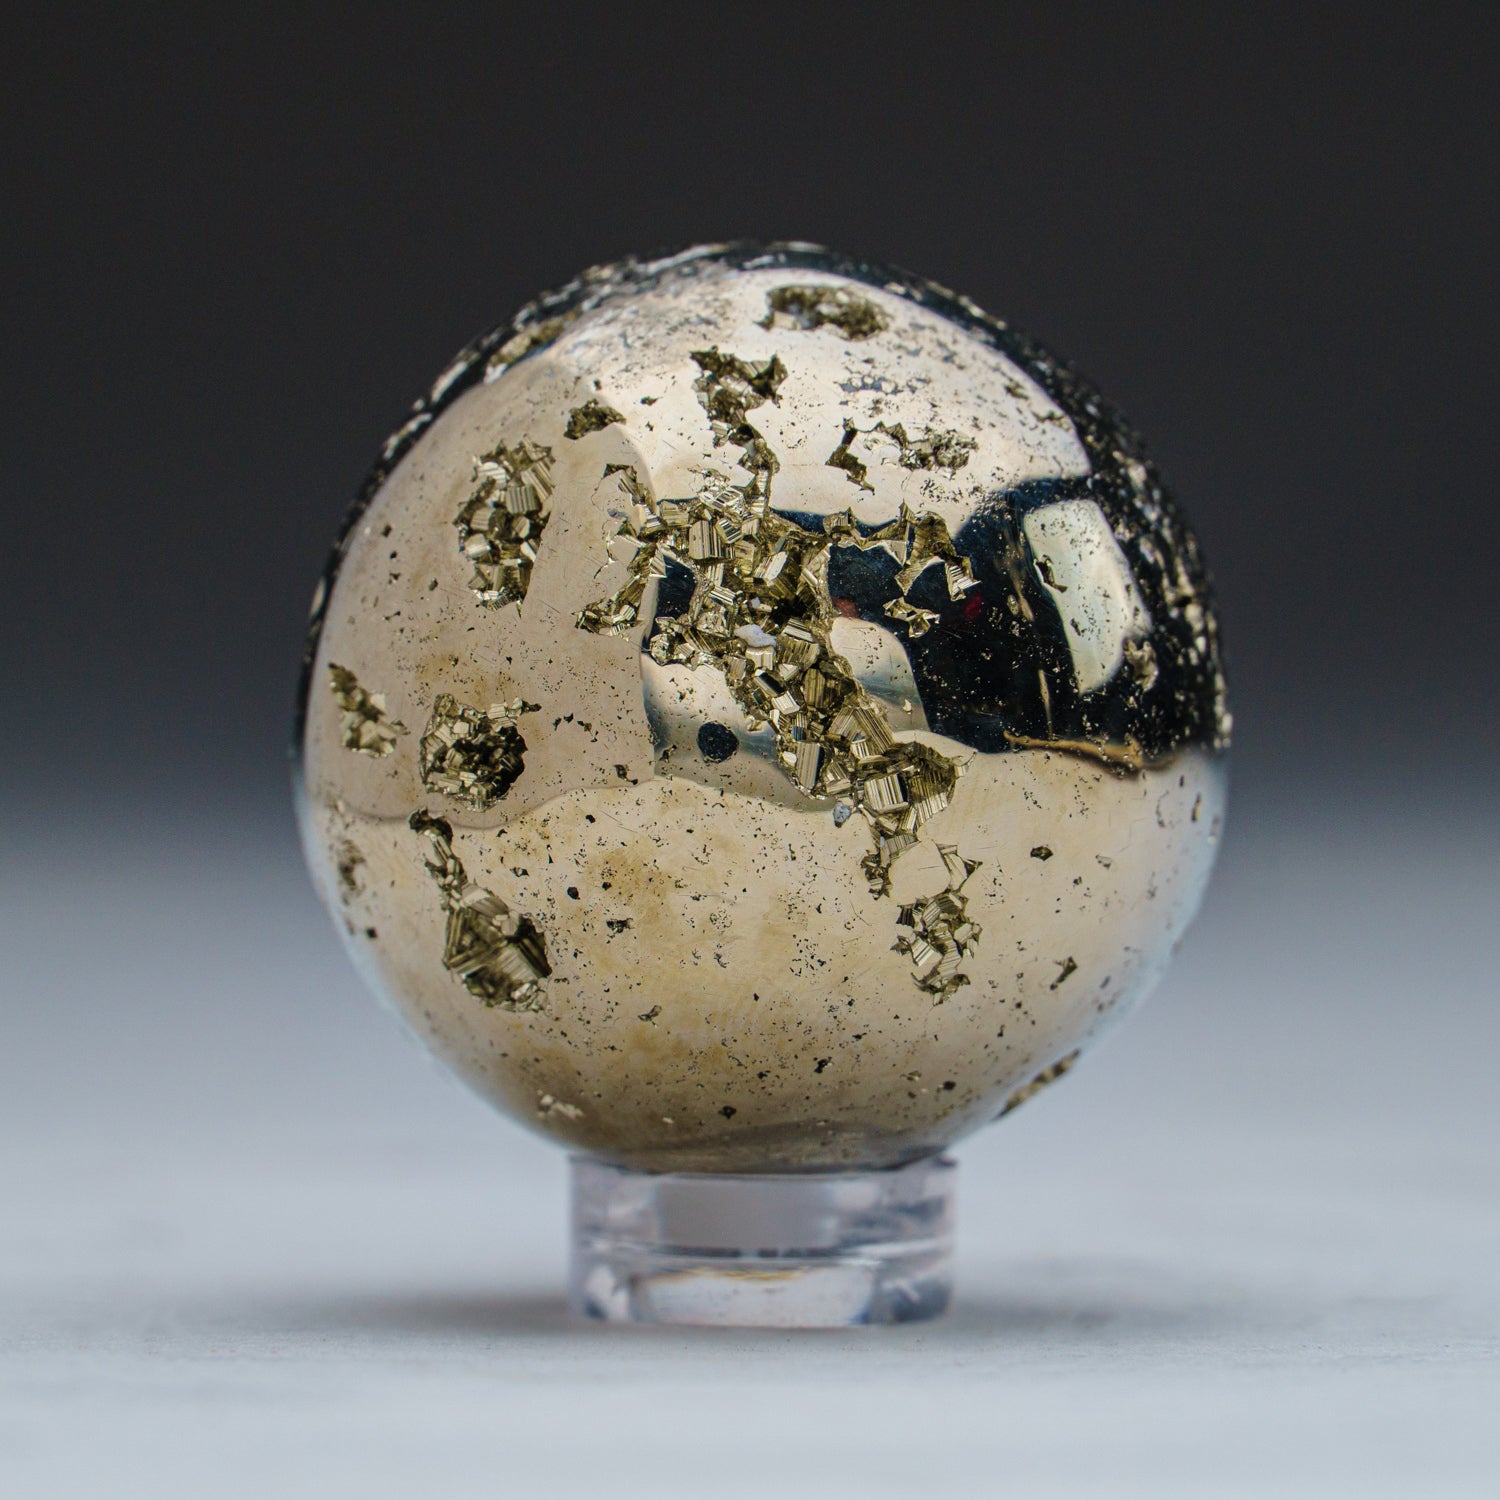 Polished Pyrite Sphere from Peru (1.25", 130 grams)